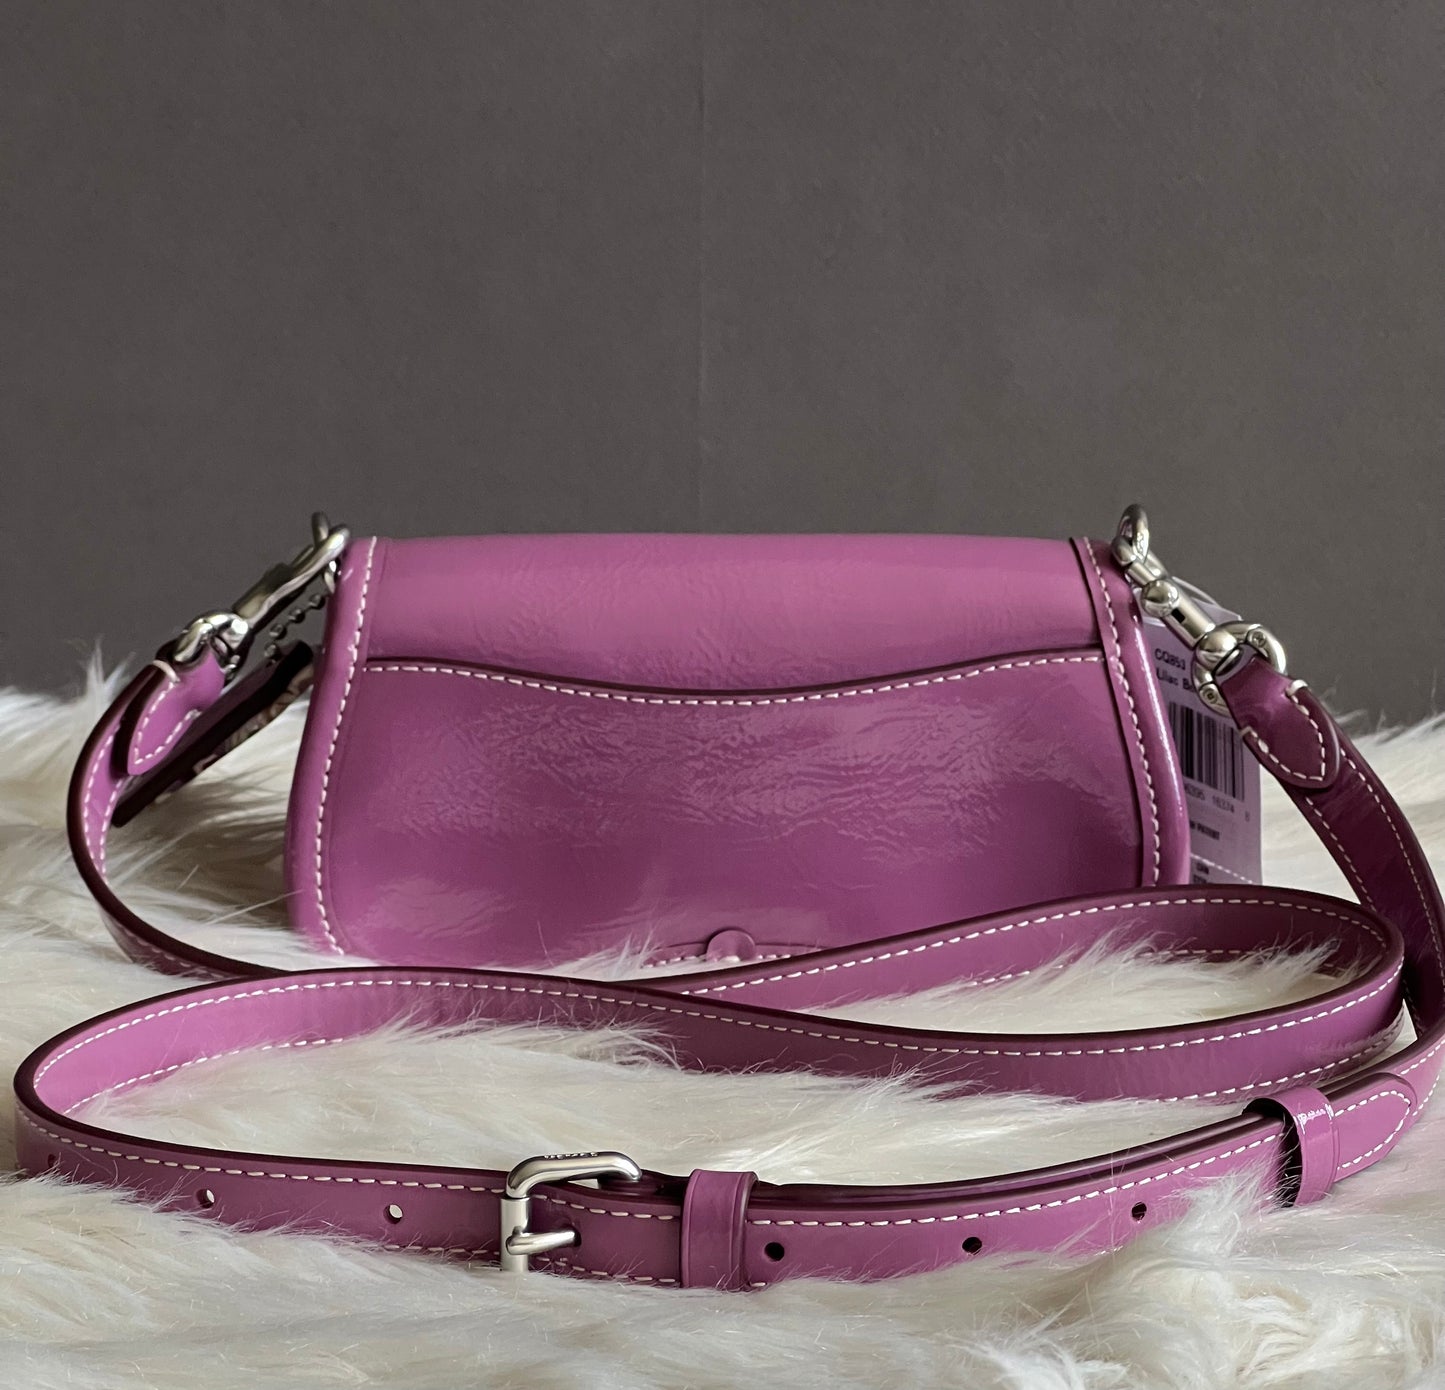 Coach Mini Wavy Dinky Bag with Crossbody Strap in Crinkled Patent Coachtopia Leather